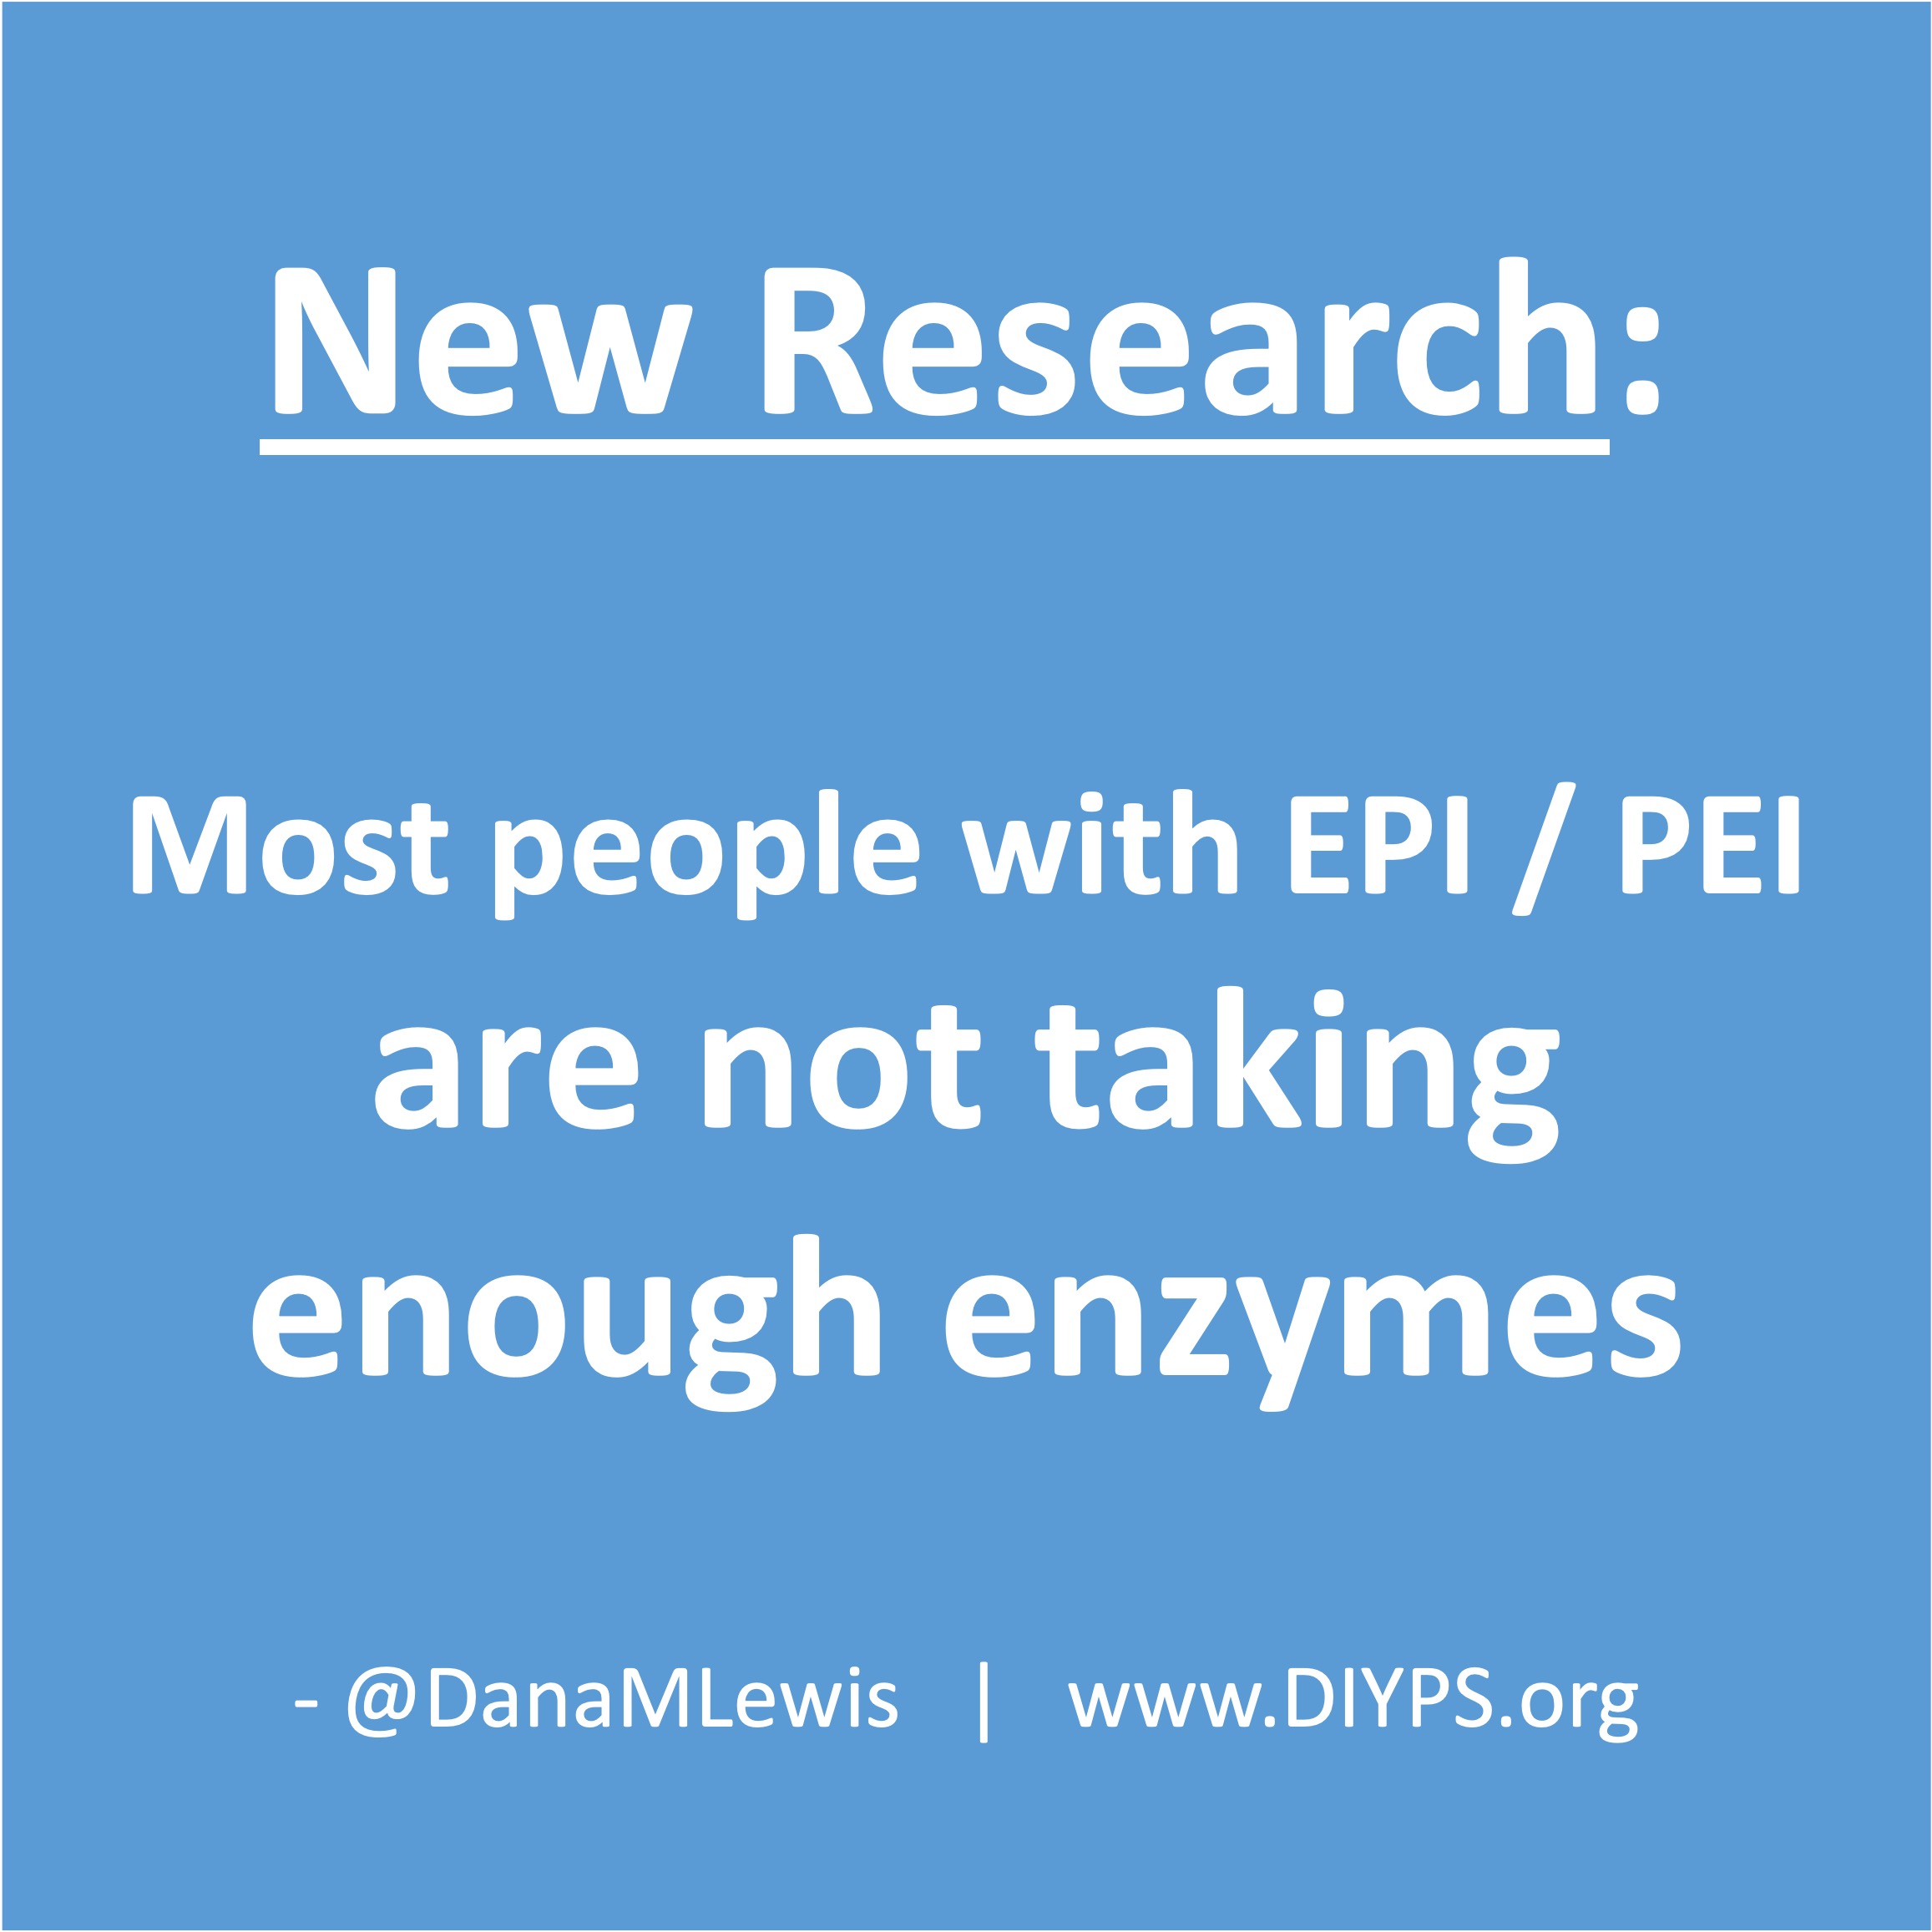 A blue square with white text that says "New Research: Most people with EPI (PEI) are not taking enough enzymes", a blog post by Dana M. Lewis